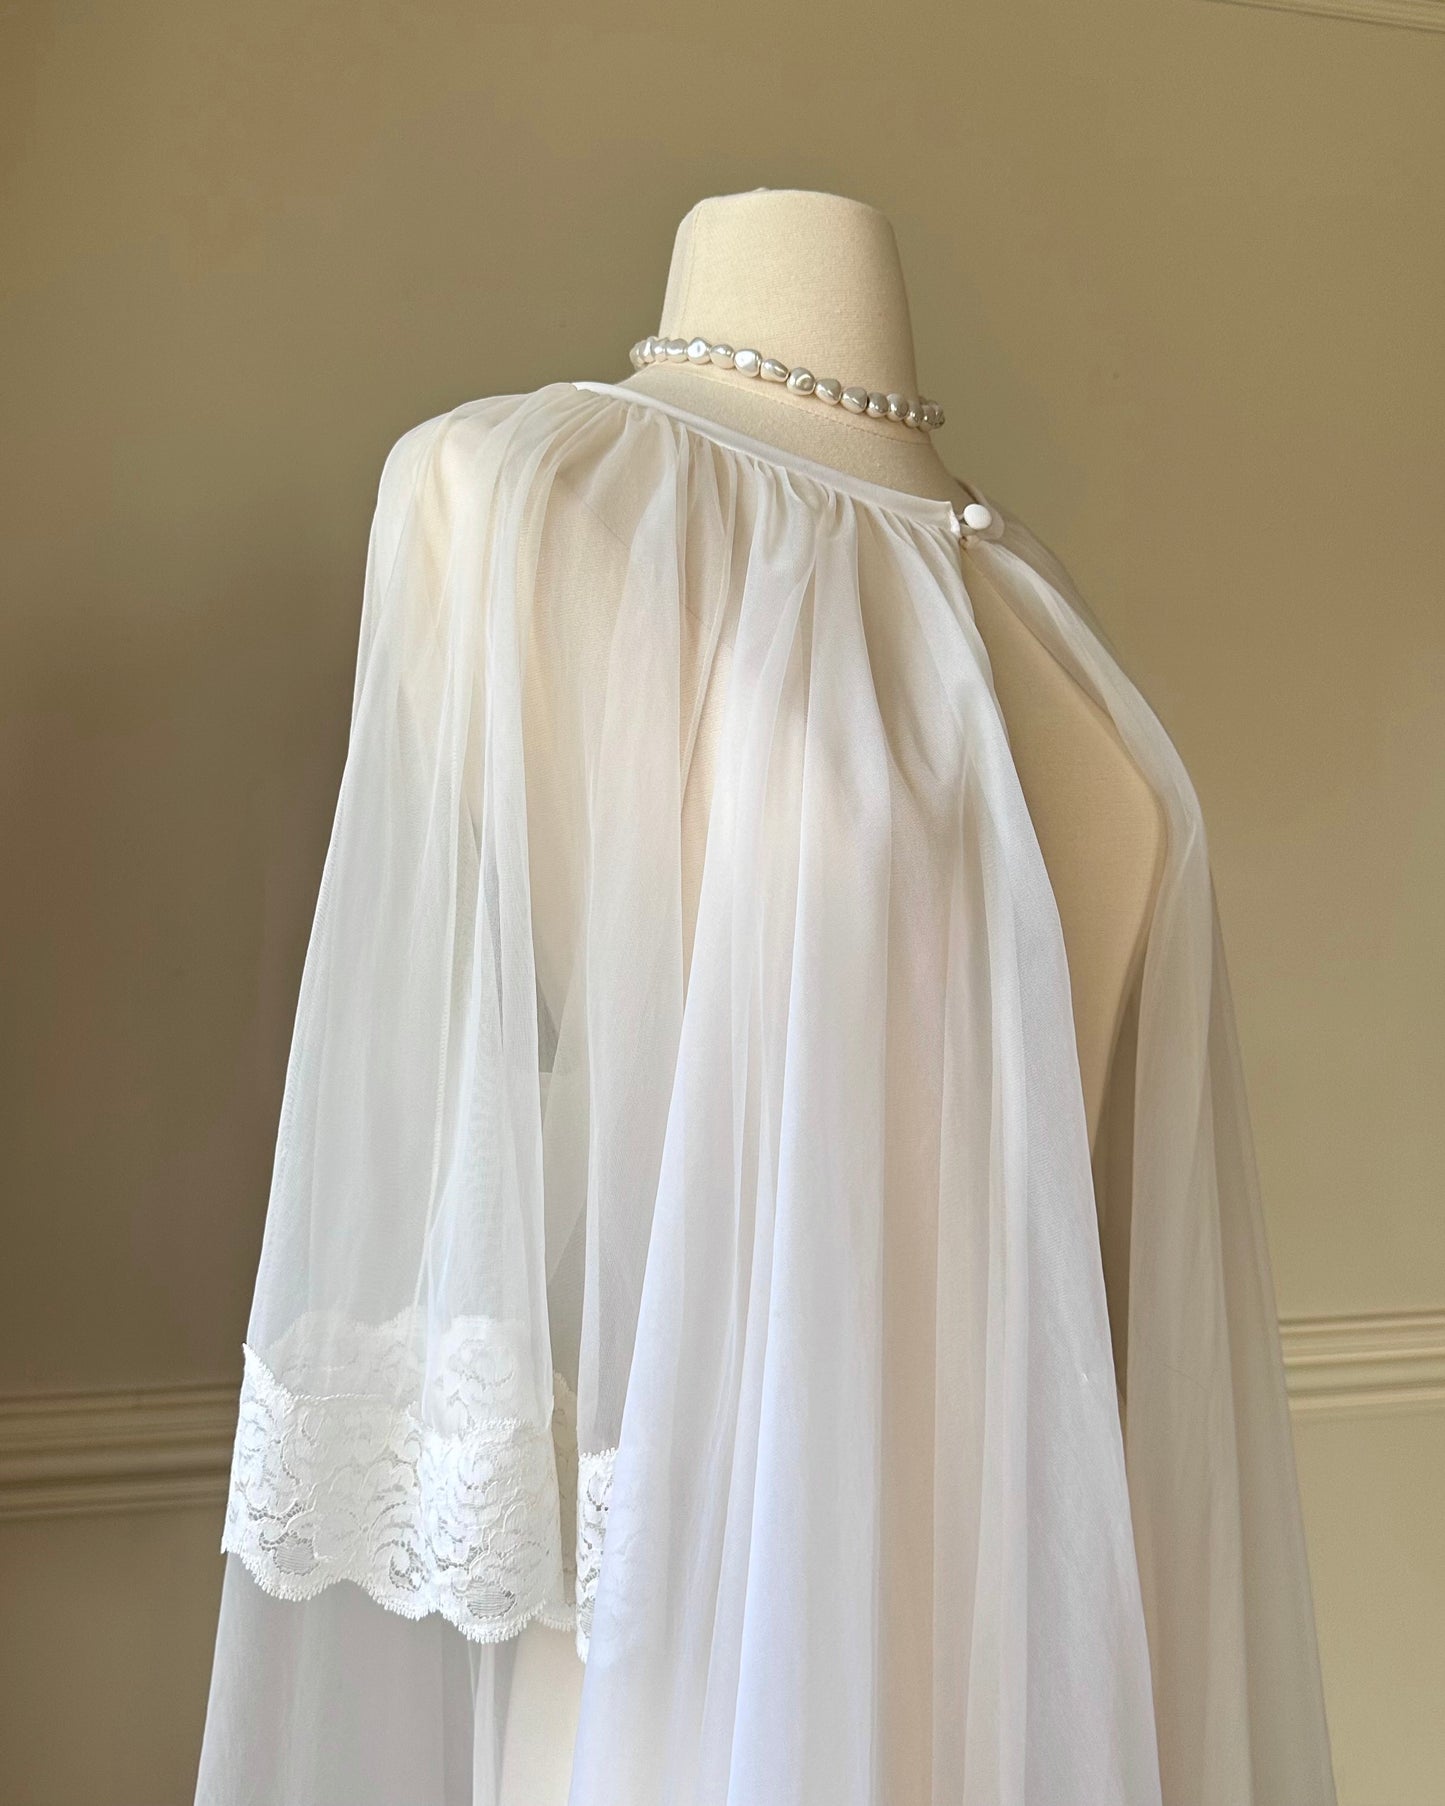 Delicate Dreamy Sheer Cape featuring Pleated Chiffon Material